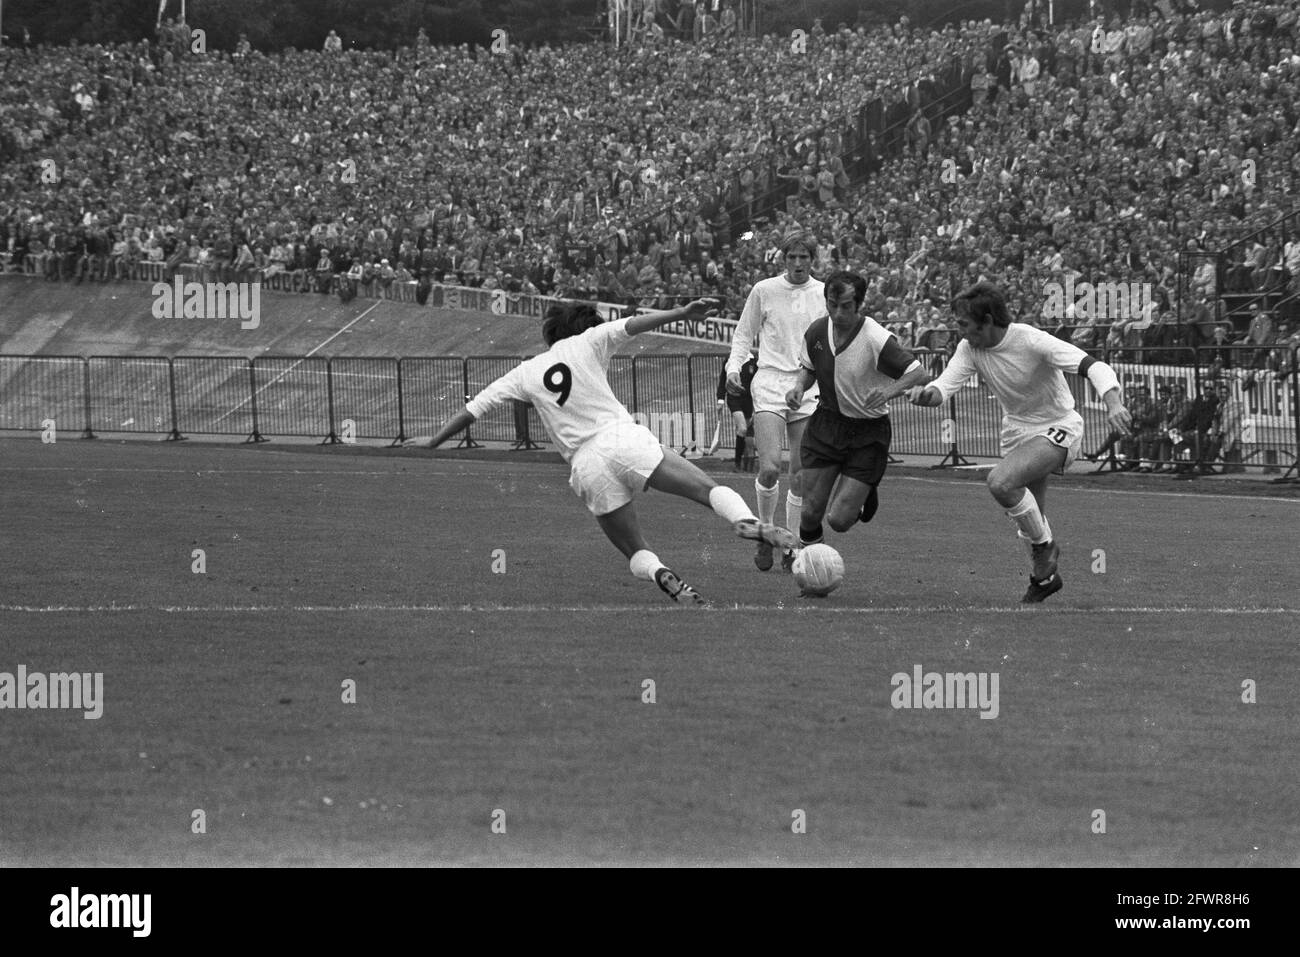 NEC against Feyenoord 1-2, Coen Moulijn in duel, August 29, 1971, sports, soccer, The Netherlands, 20th century press agency photo, news to remember, documentary, historic photography 1945-1990, visual stories, human history of the Twentieth Century, capturing moments in time Stock Photo